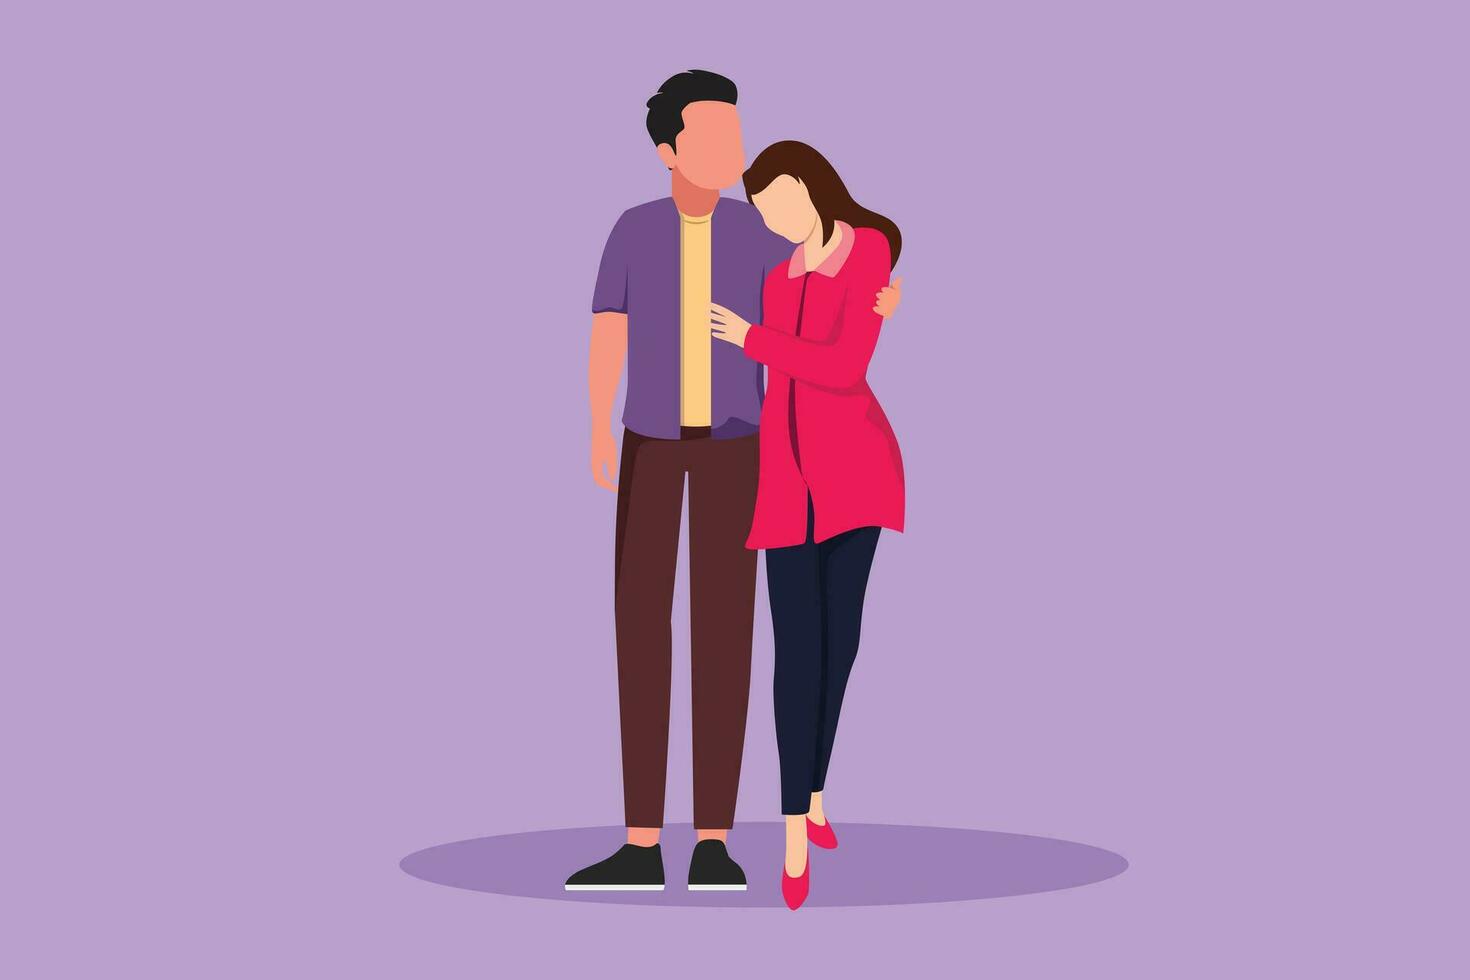 Cartoon flat style drawing young couple man and woman in love by hugging each other. Romantic couple in love spending time together outdoors. Happy family concept. Graphic design vector illustration